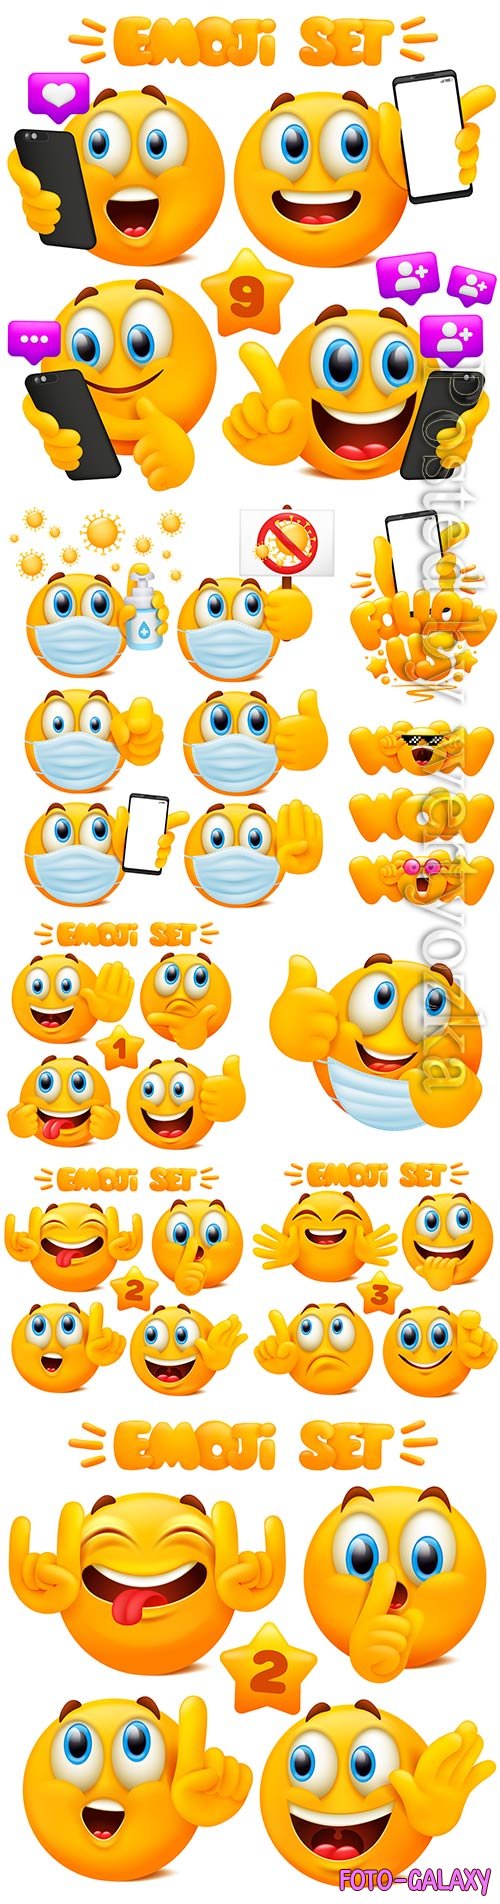 Set of yellow emoji cartoon characters with different facial expressions in glossy 3d